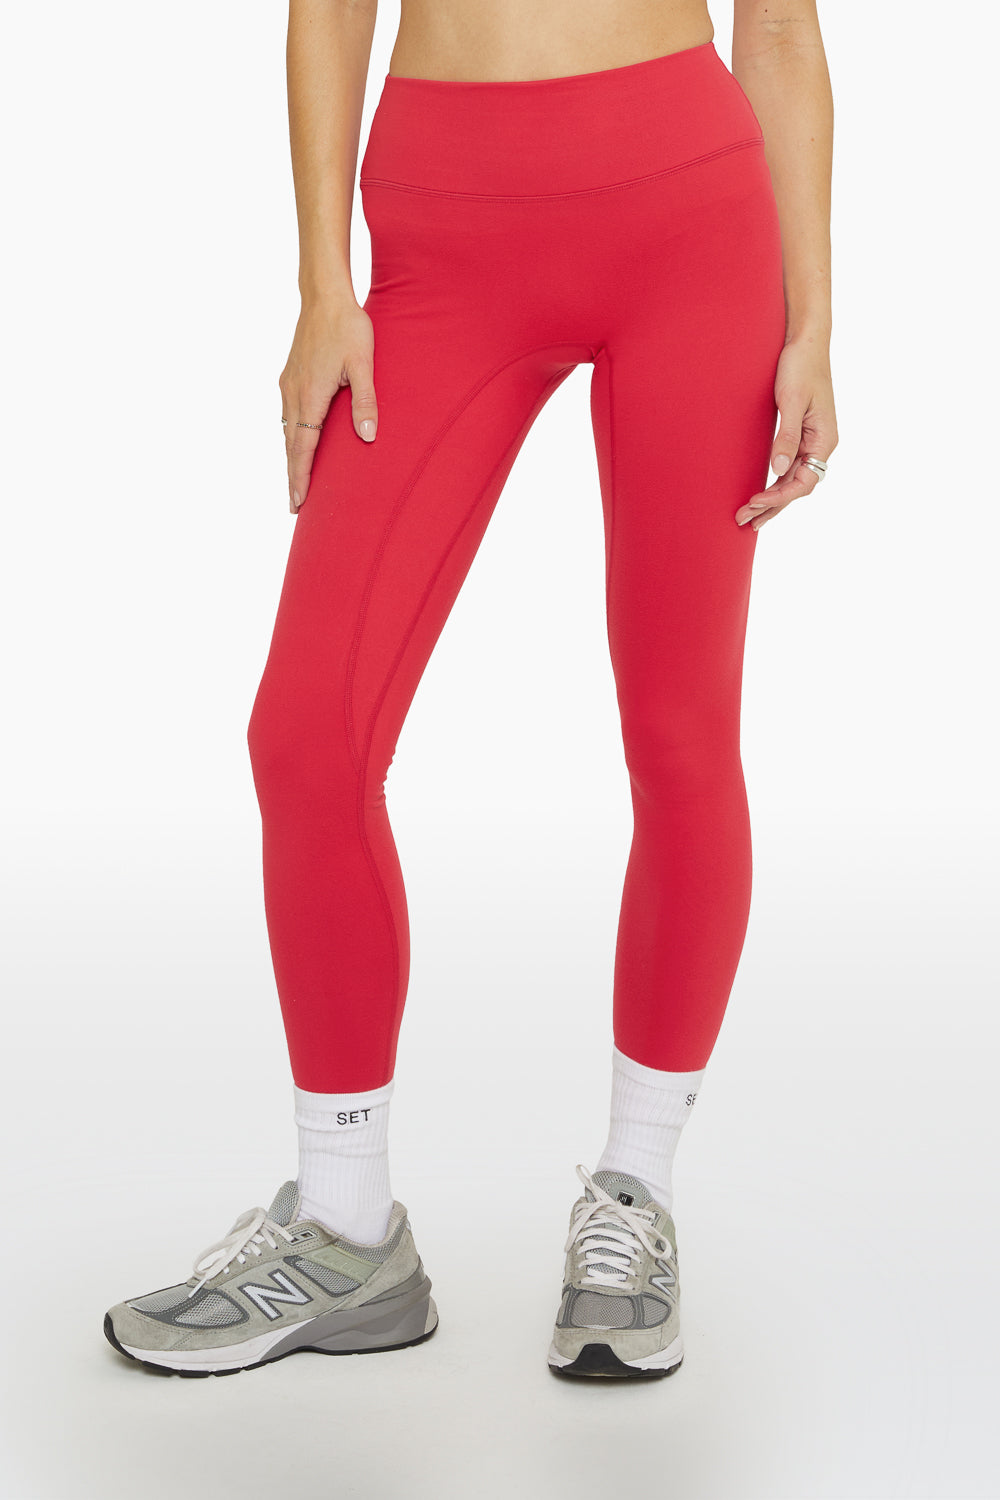 FORMCLOUD™ LEGGINGS - SPICY Featured Image